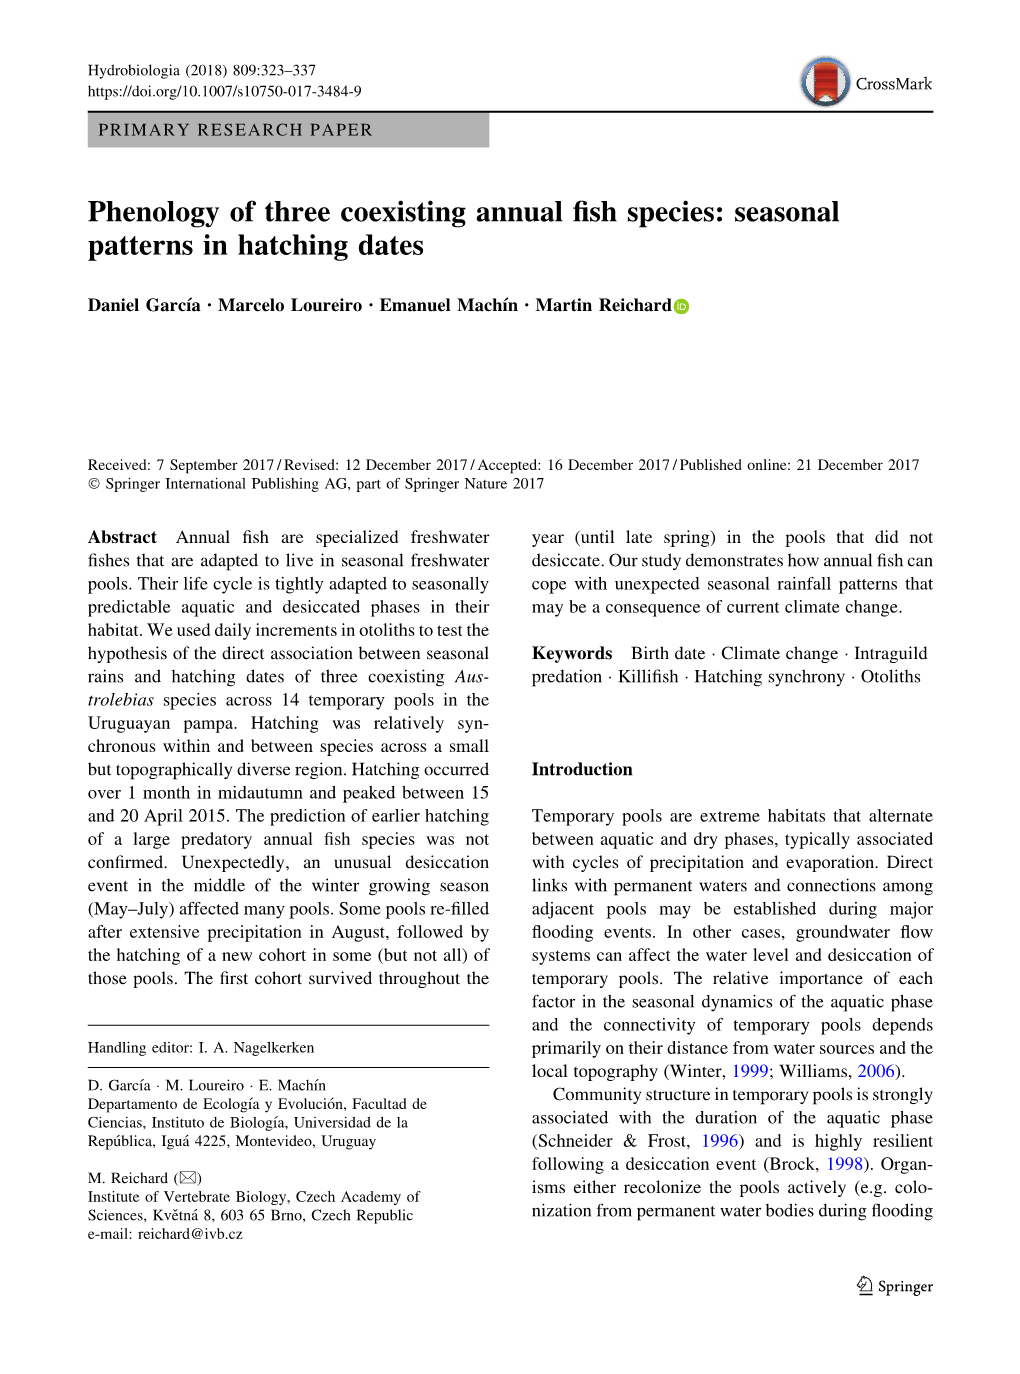 Phenology of Three Coexisting Annual Fish Species: Seasonal Patterns In